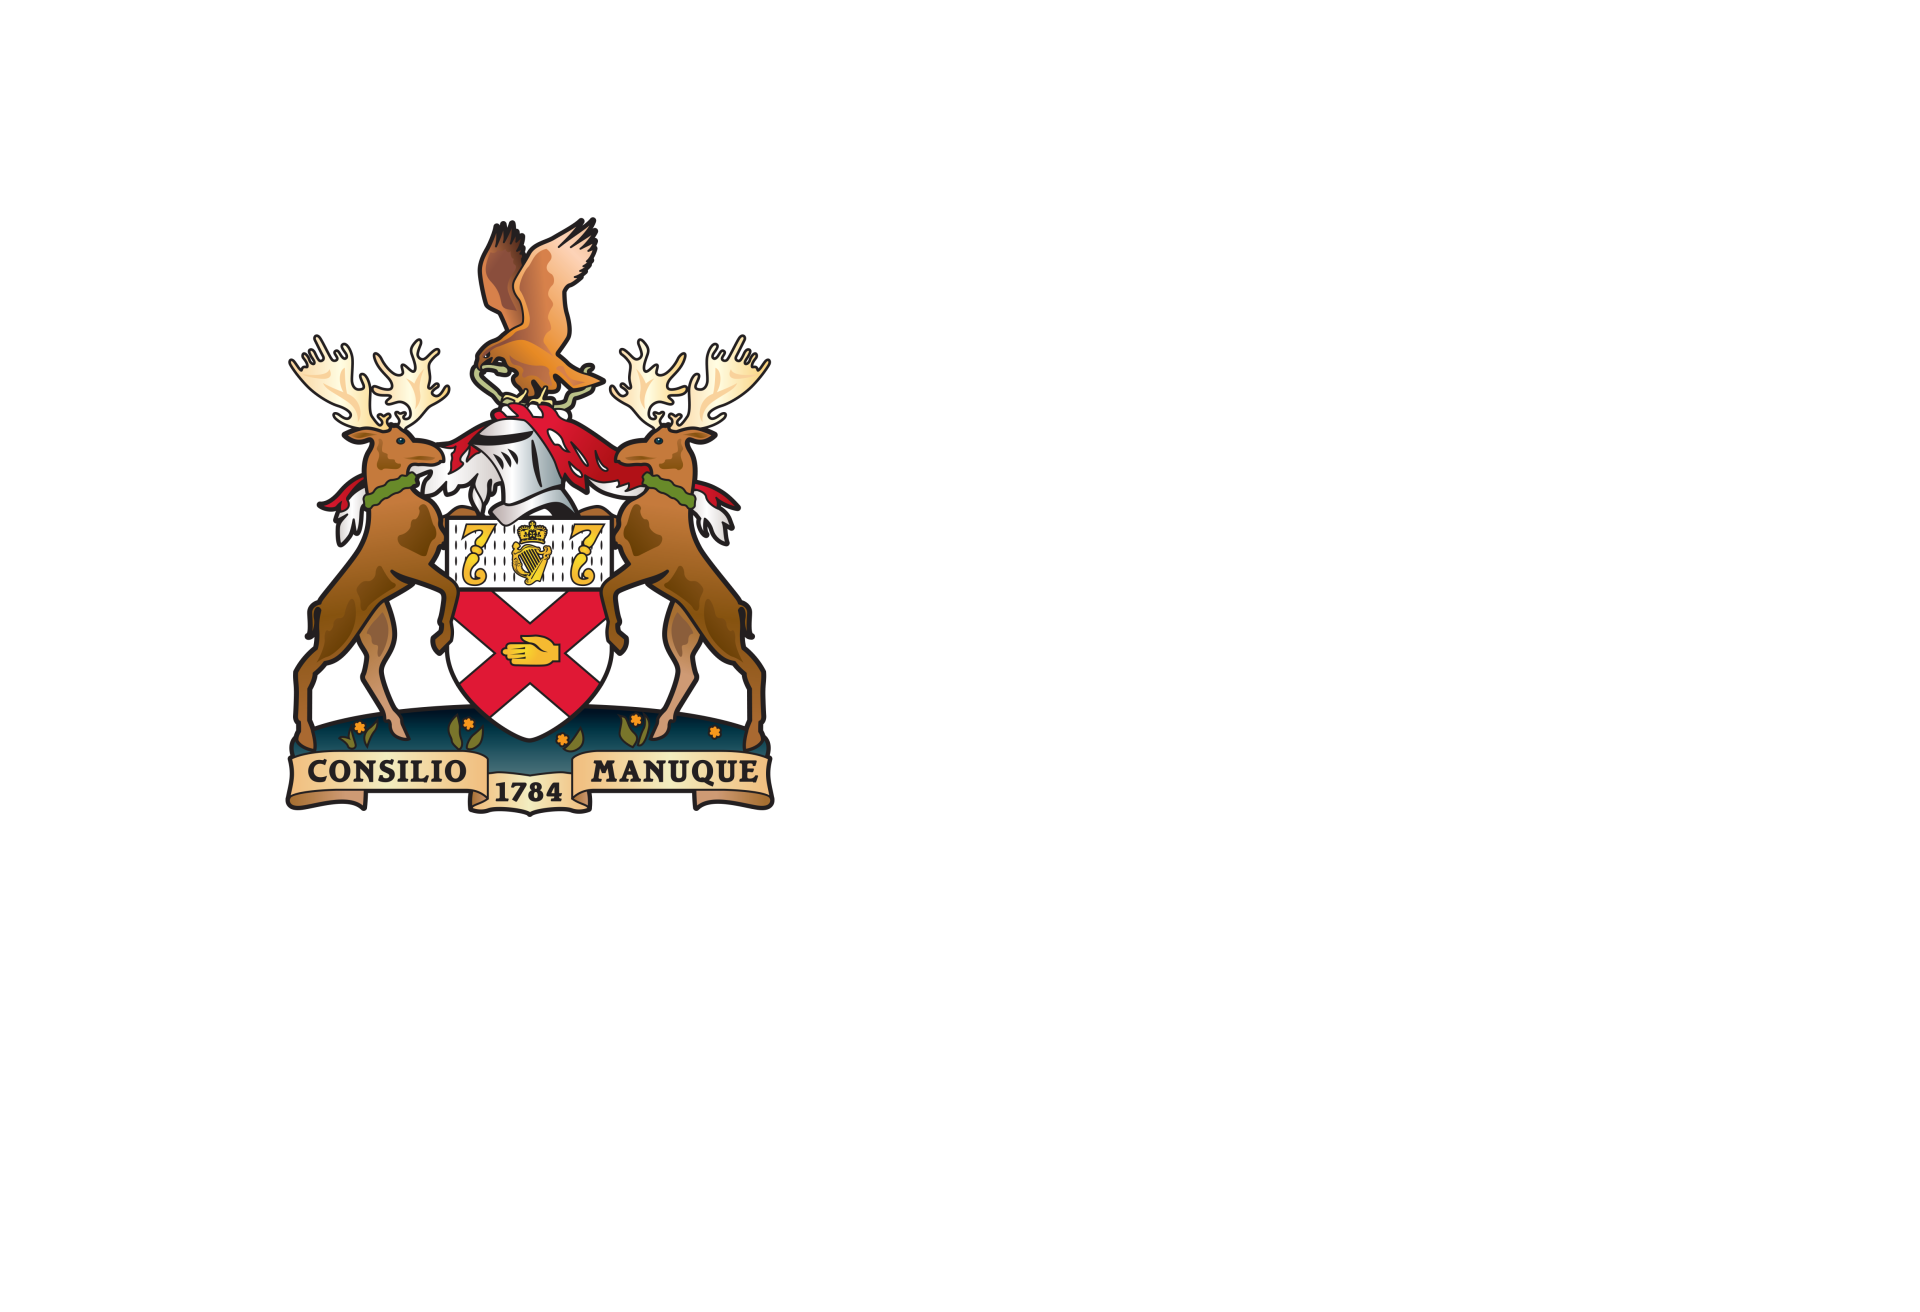 Royal College of Surgeons in Ireland (RCSI) University of Medicine and Health Sciences